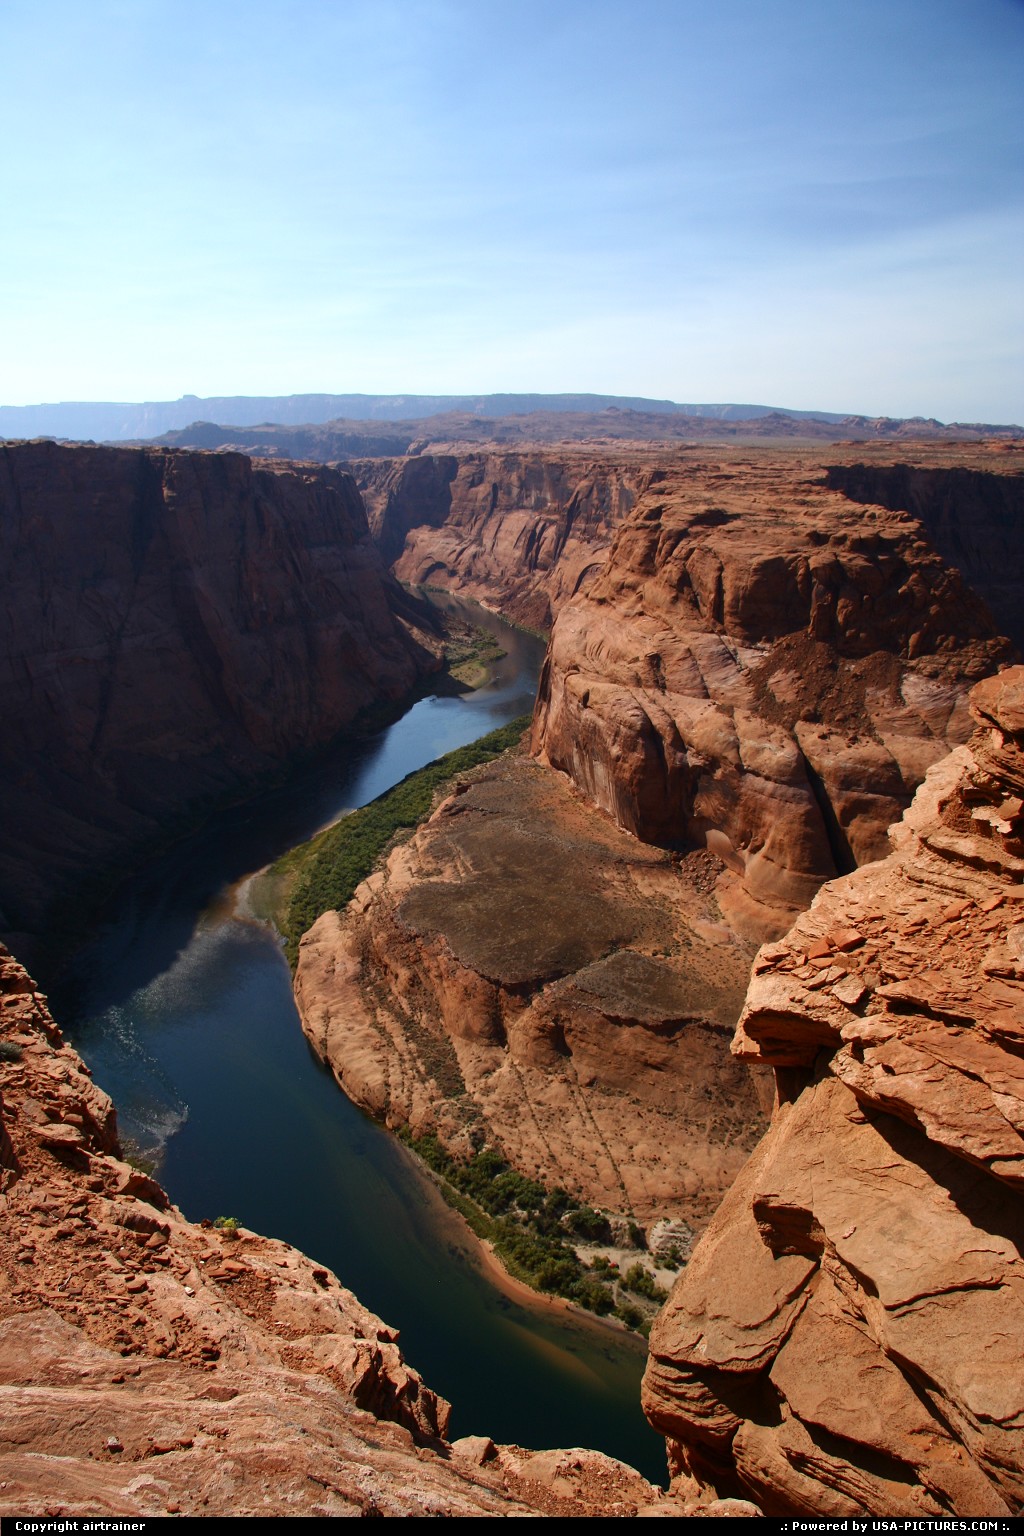 Picture by airtrainer: Not in a City Arizona   horseshoe bend